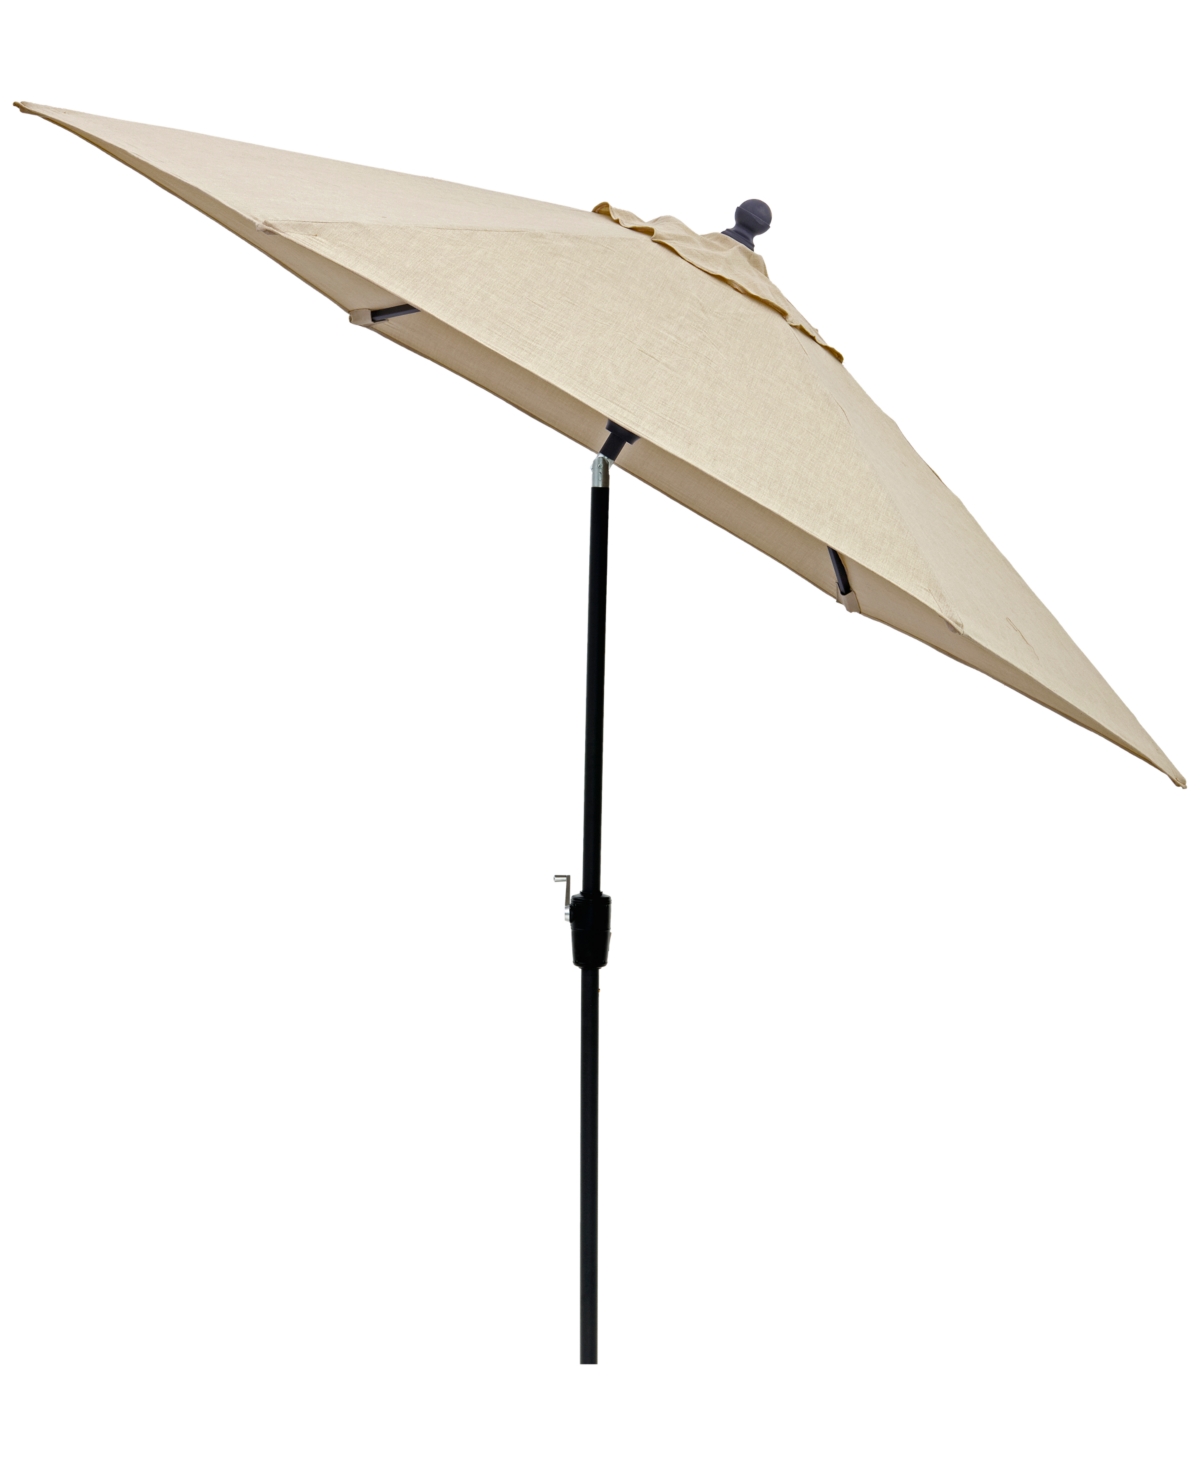 Agio Wythburn Mix And Match Fabric 9' Auto Tilt Umbrella In Straw Natural,pewter Finish